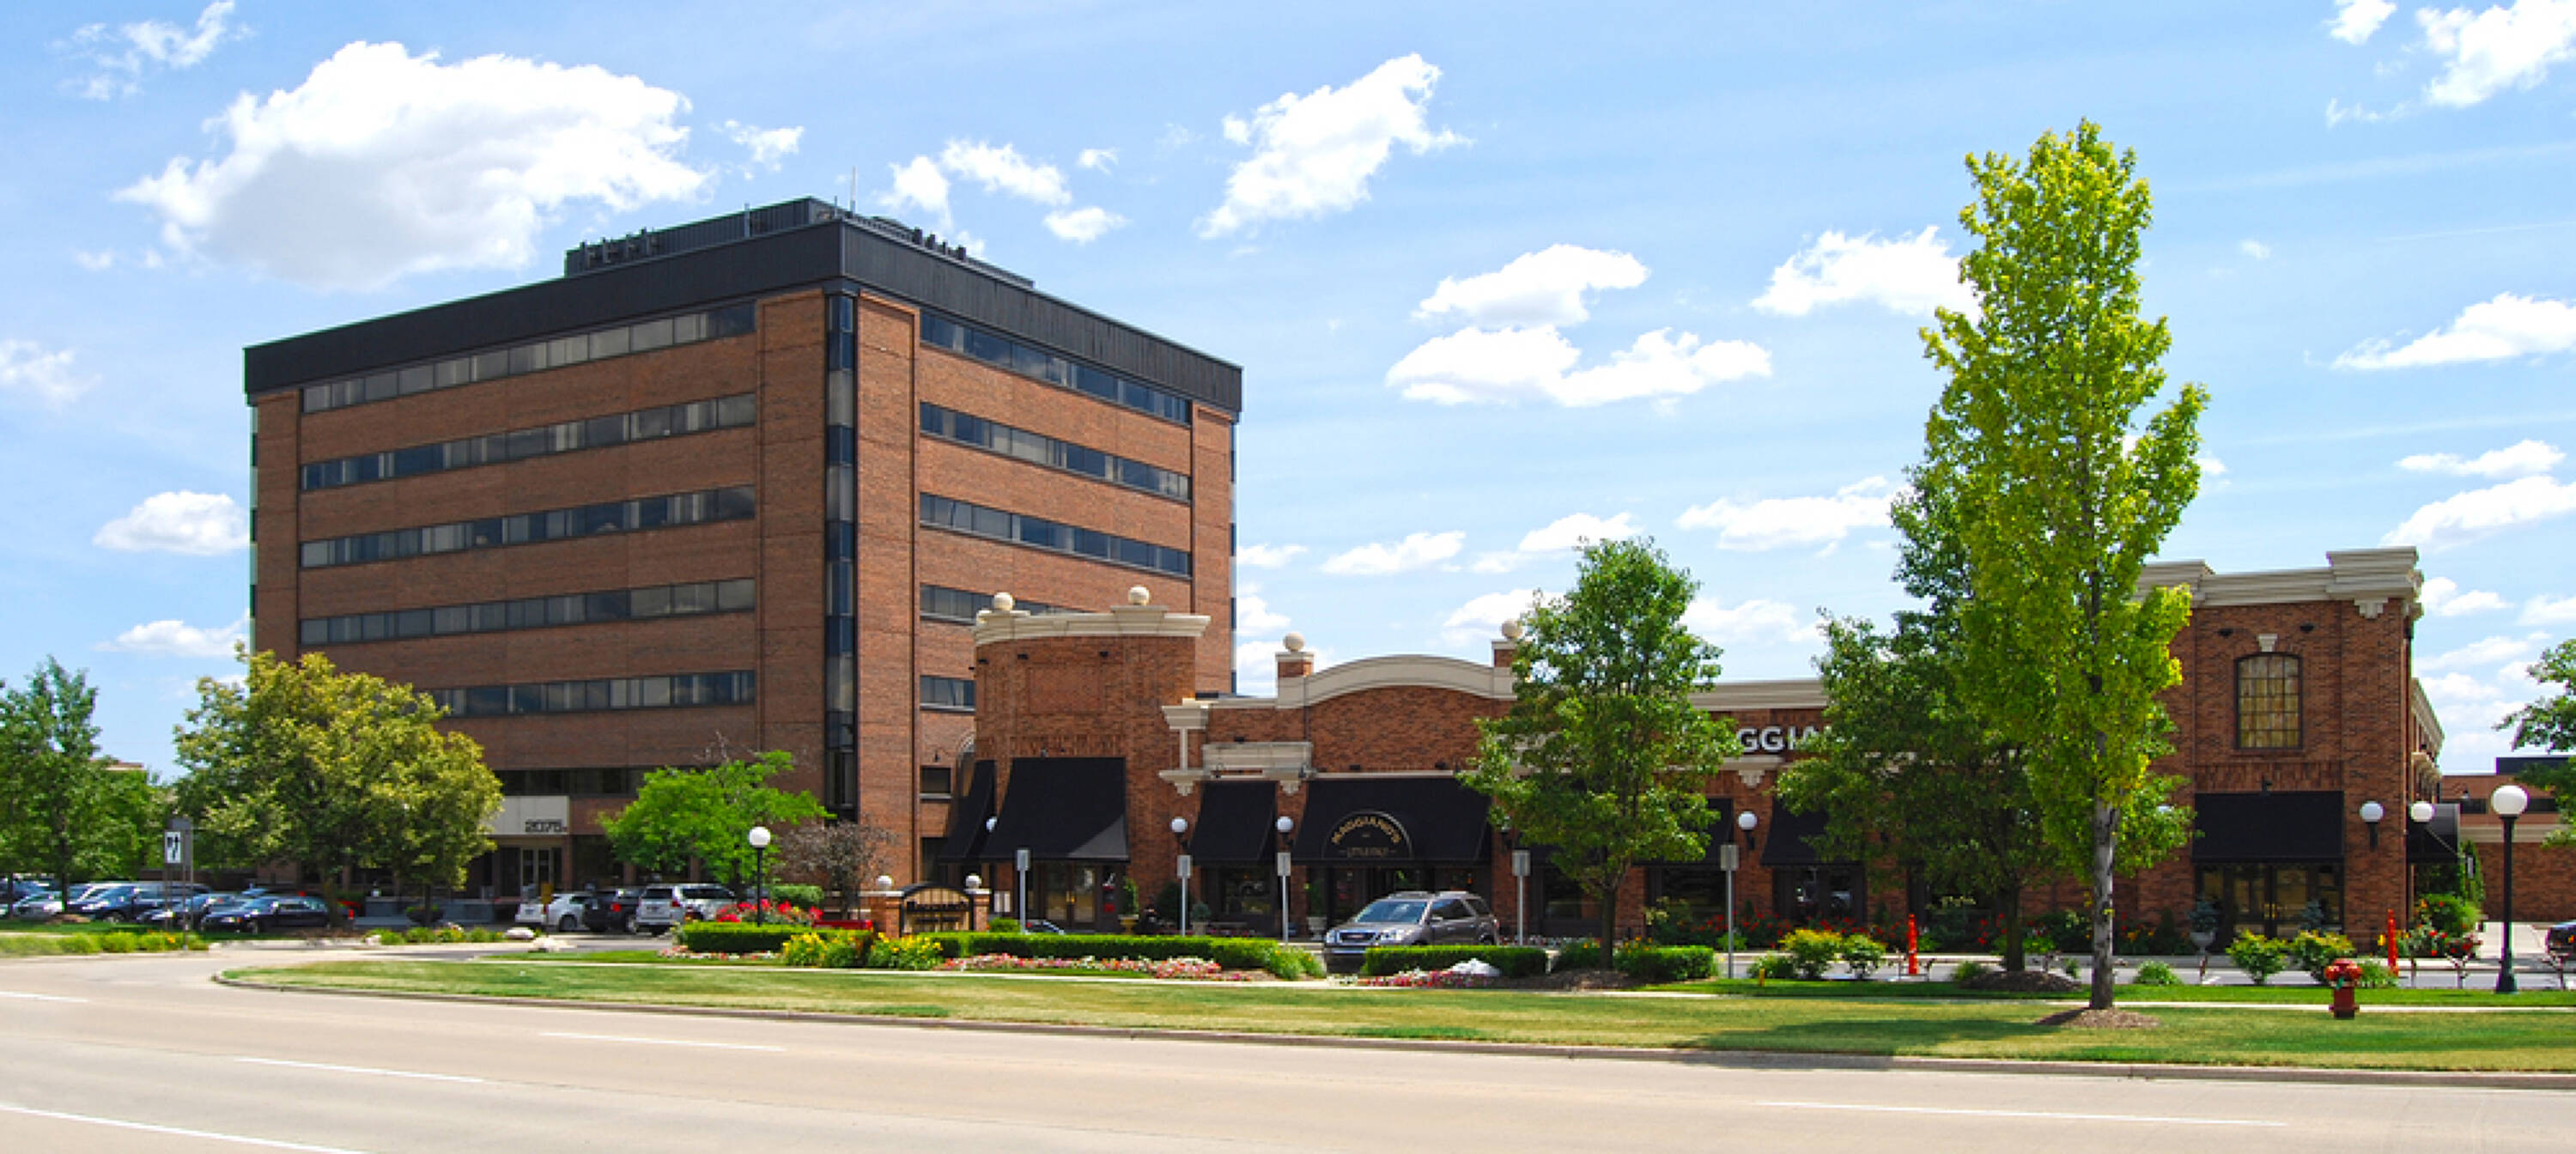 2600 W Big Beaver Rd Troy, MI 48084 - Office Property for Lease on